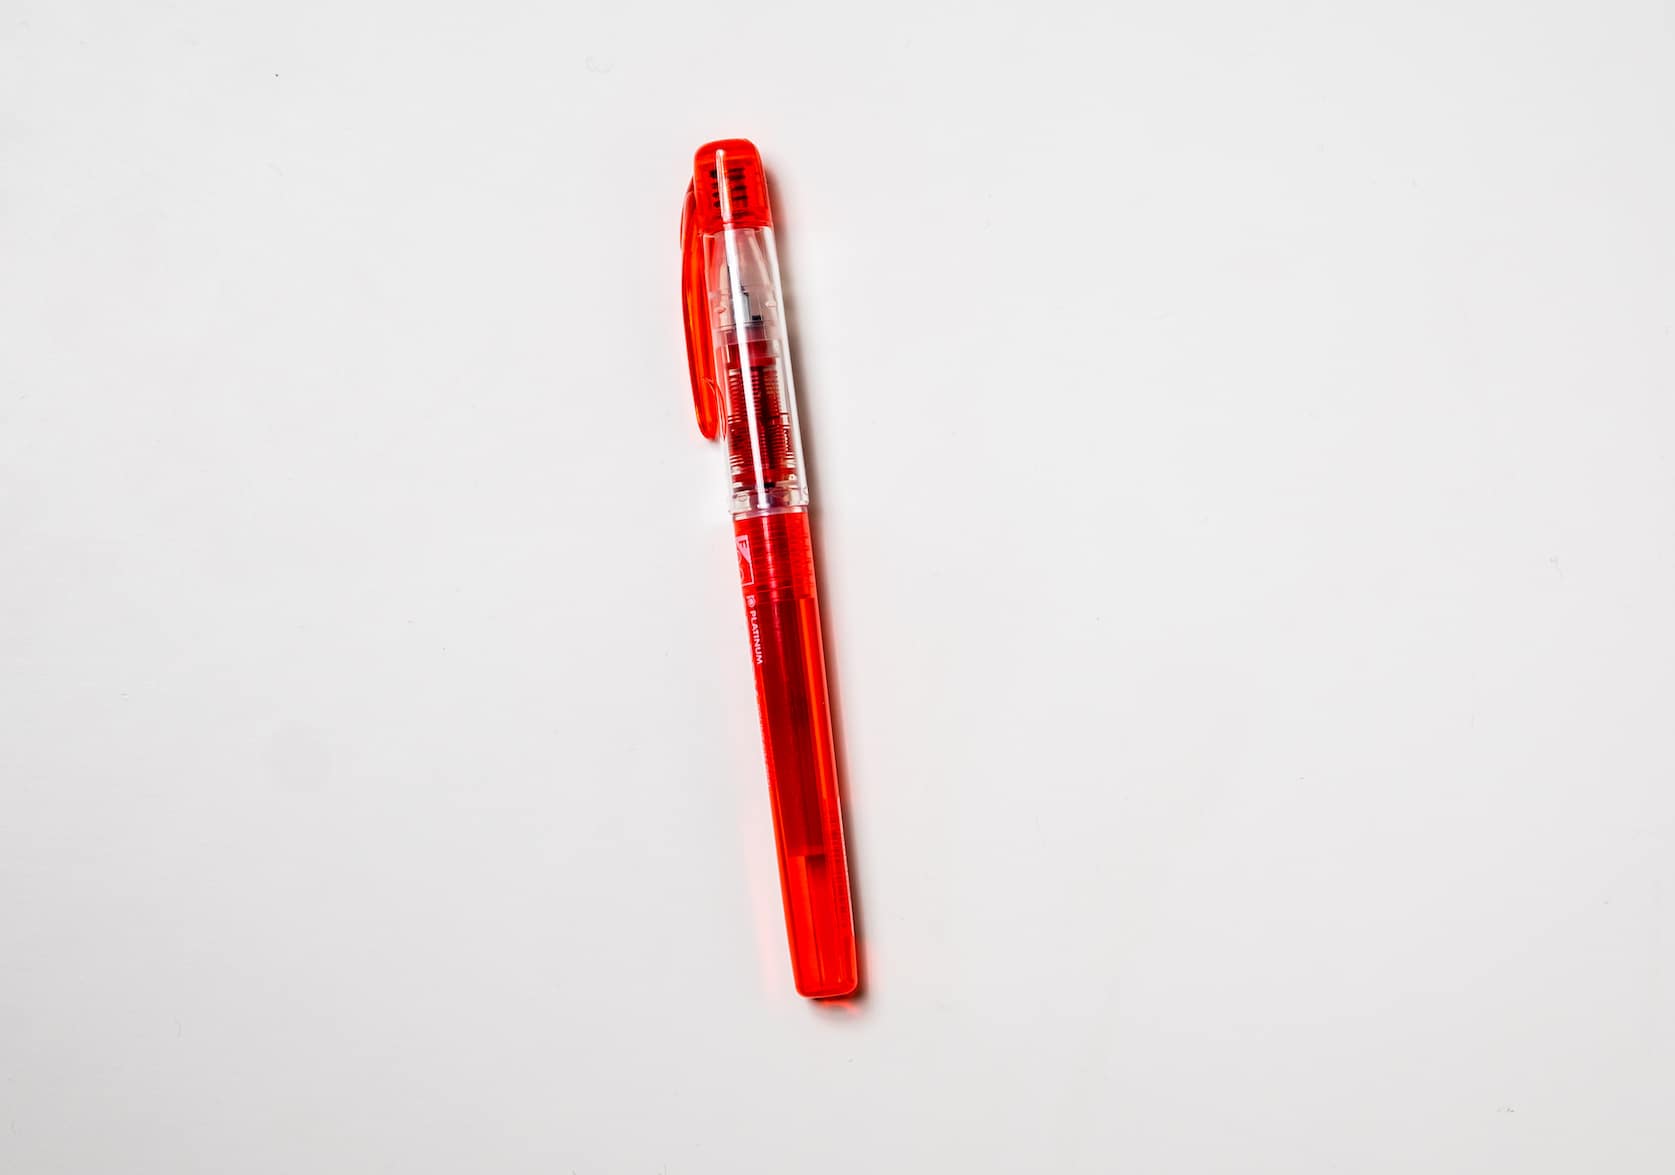 Fountain pen with a red barrel and pen clip.